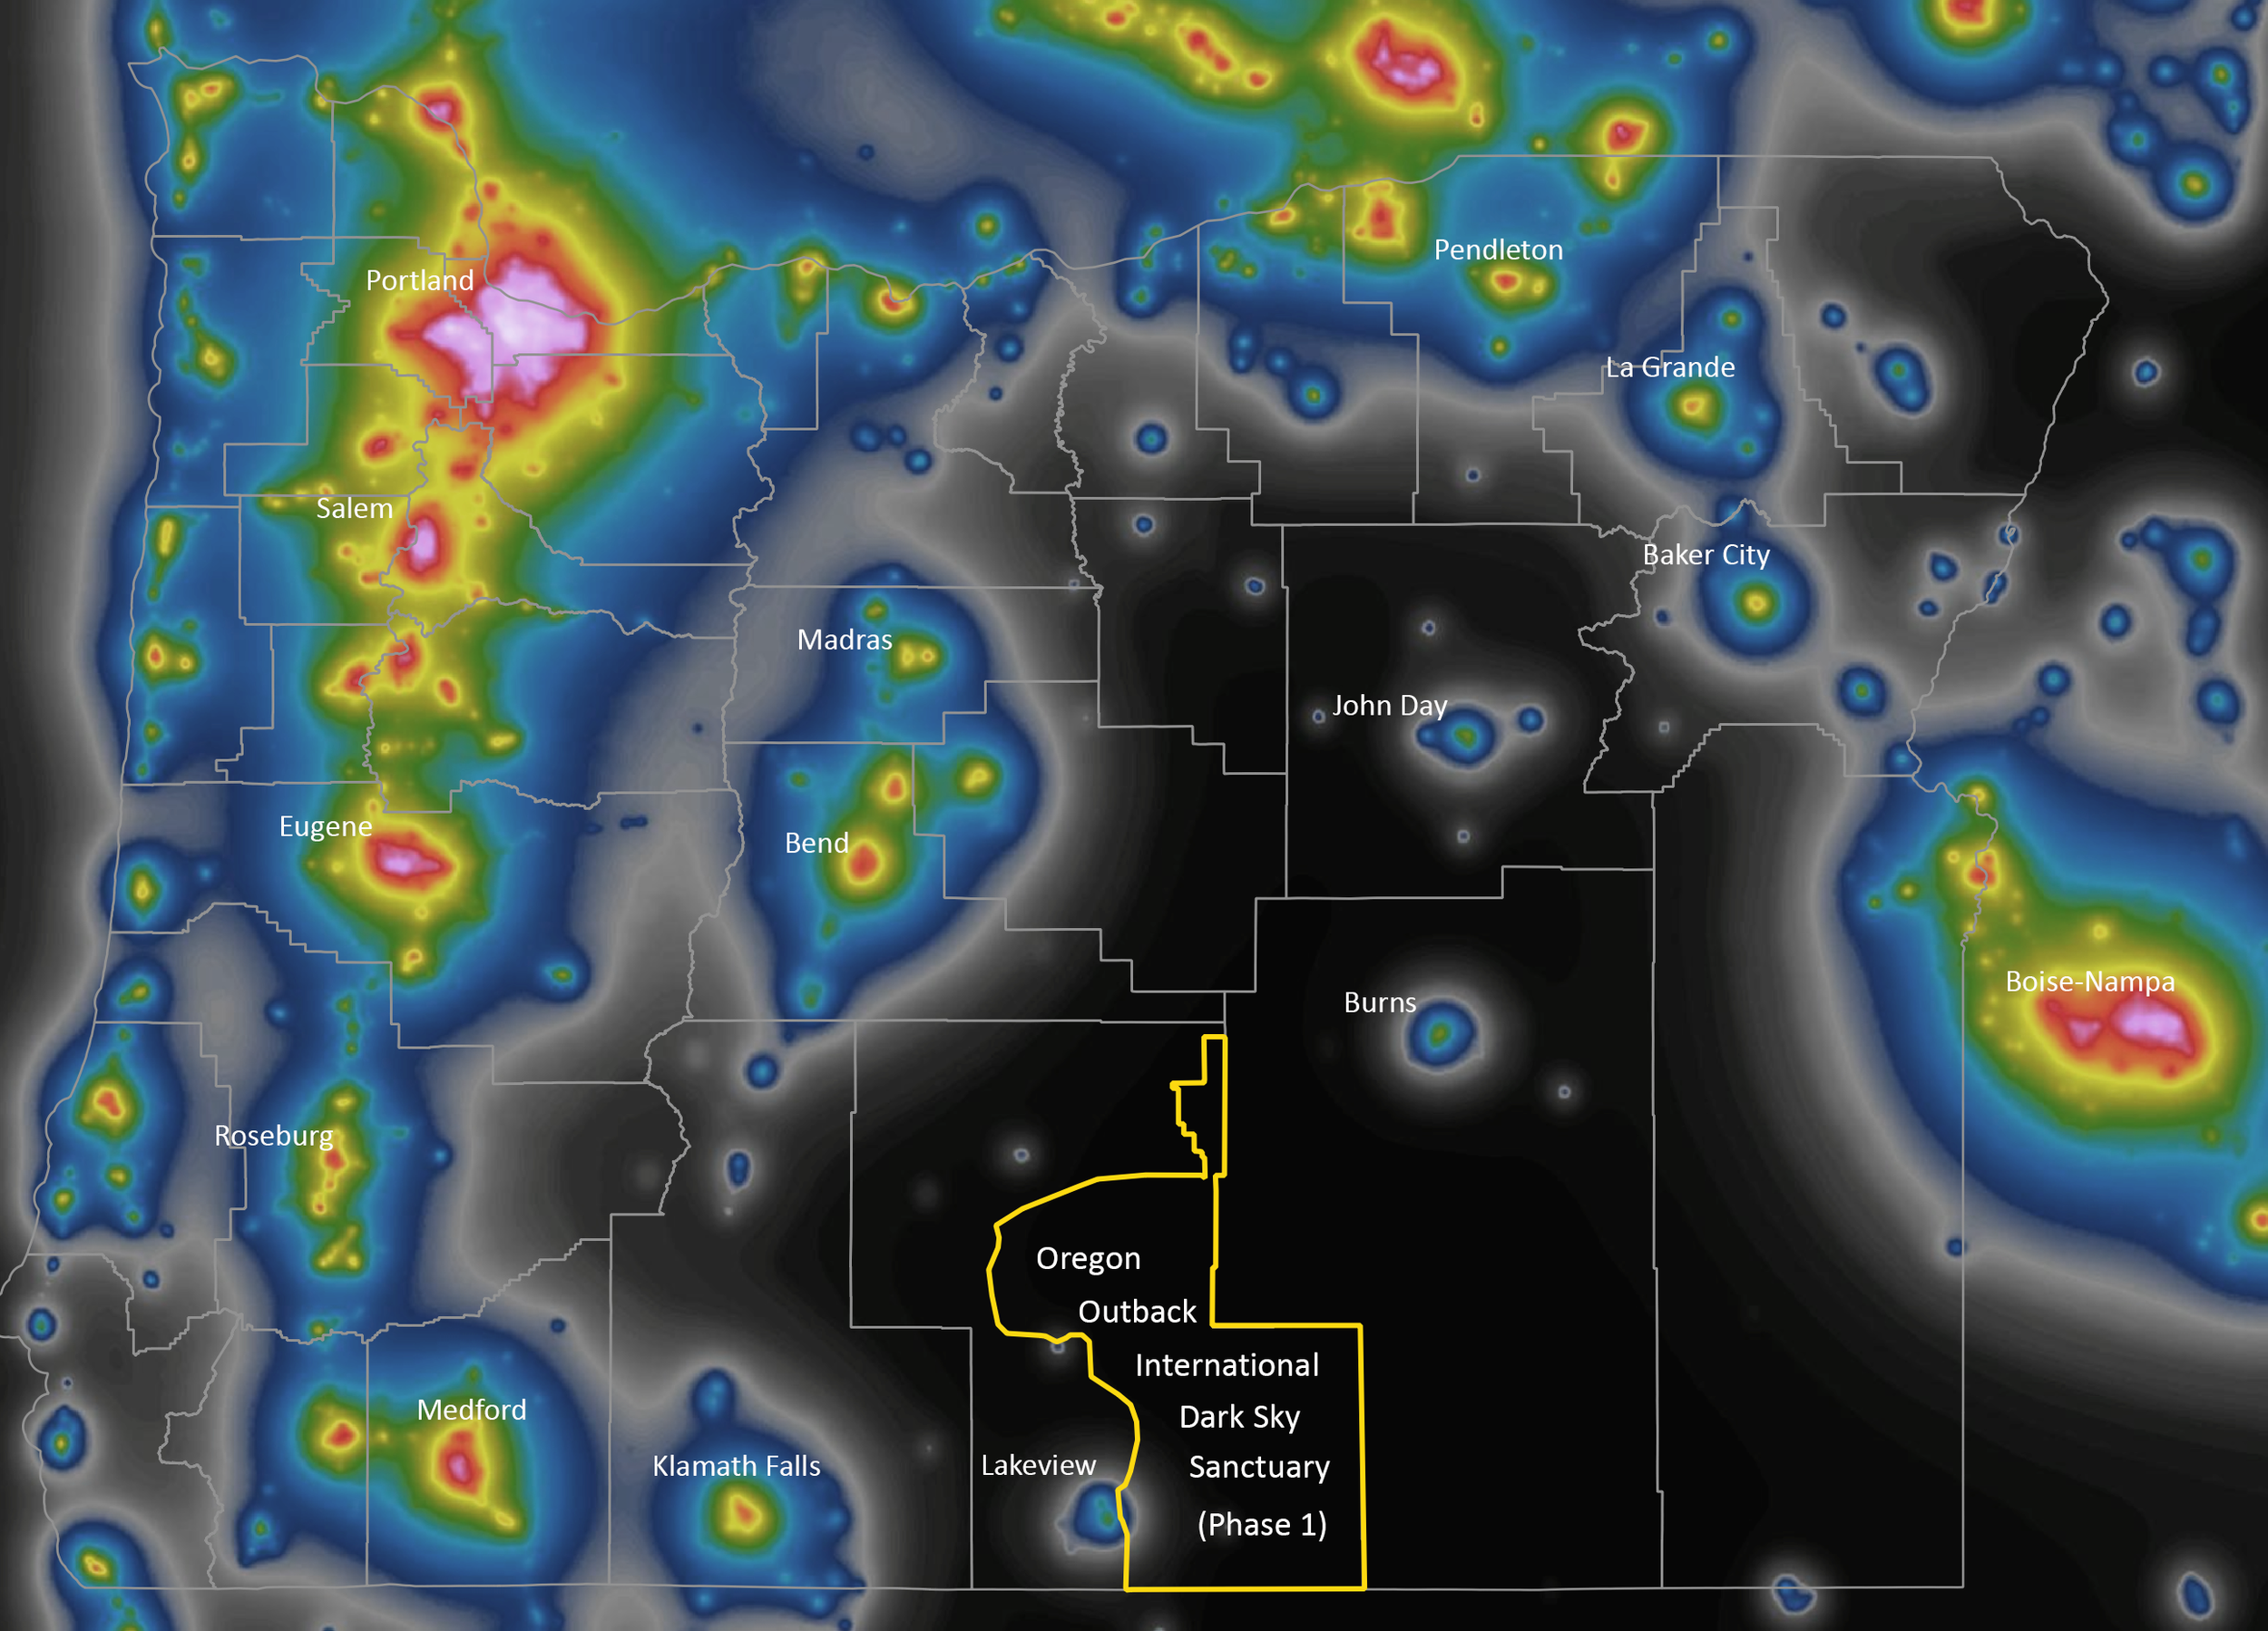 Oregon Outback Sanctuary Skyglow Map_with_labels.png